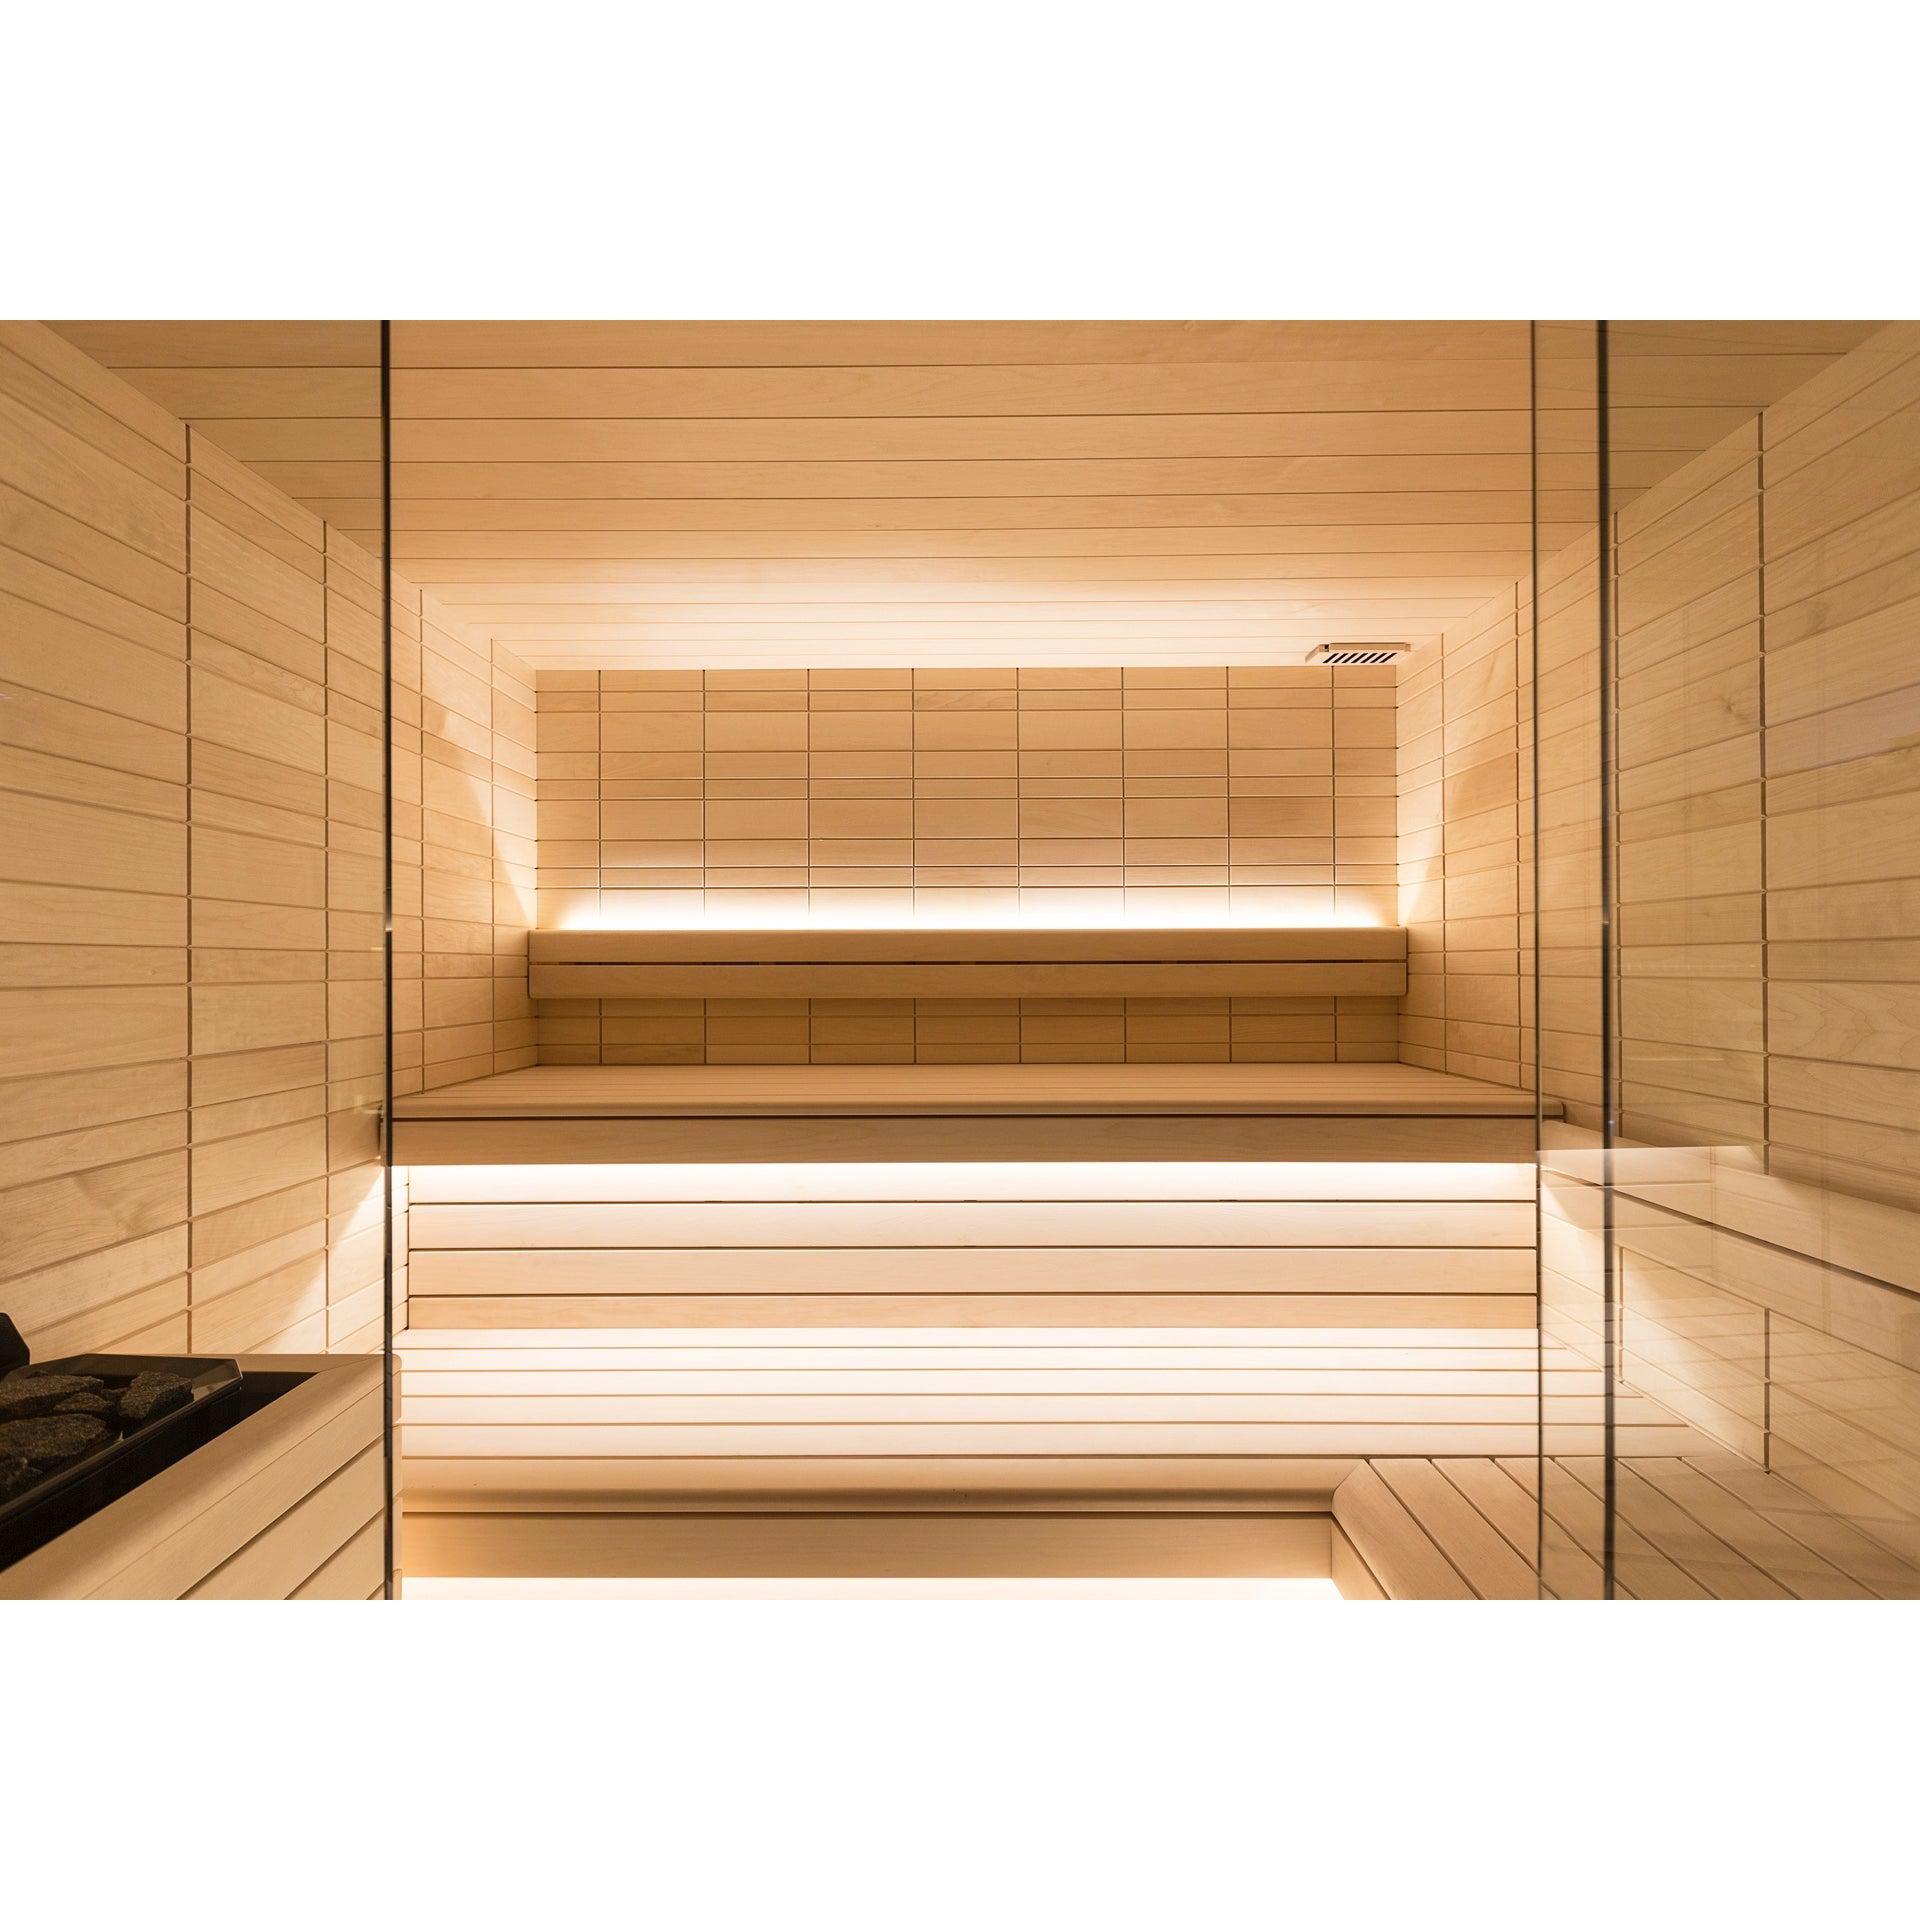 Electa Home Sauna Kit - Purely Relaxation